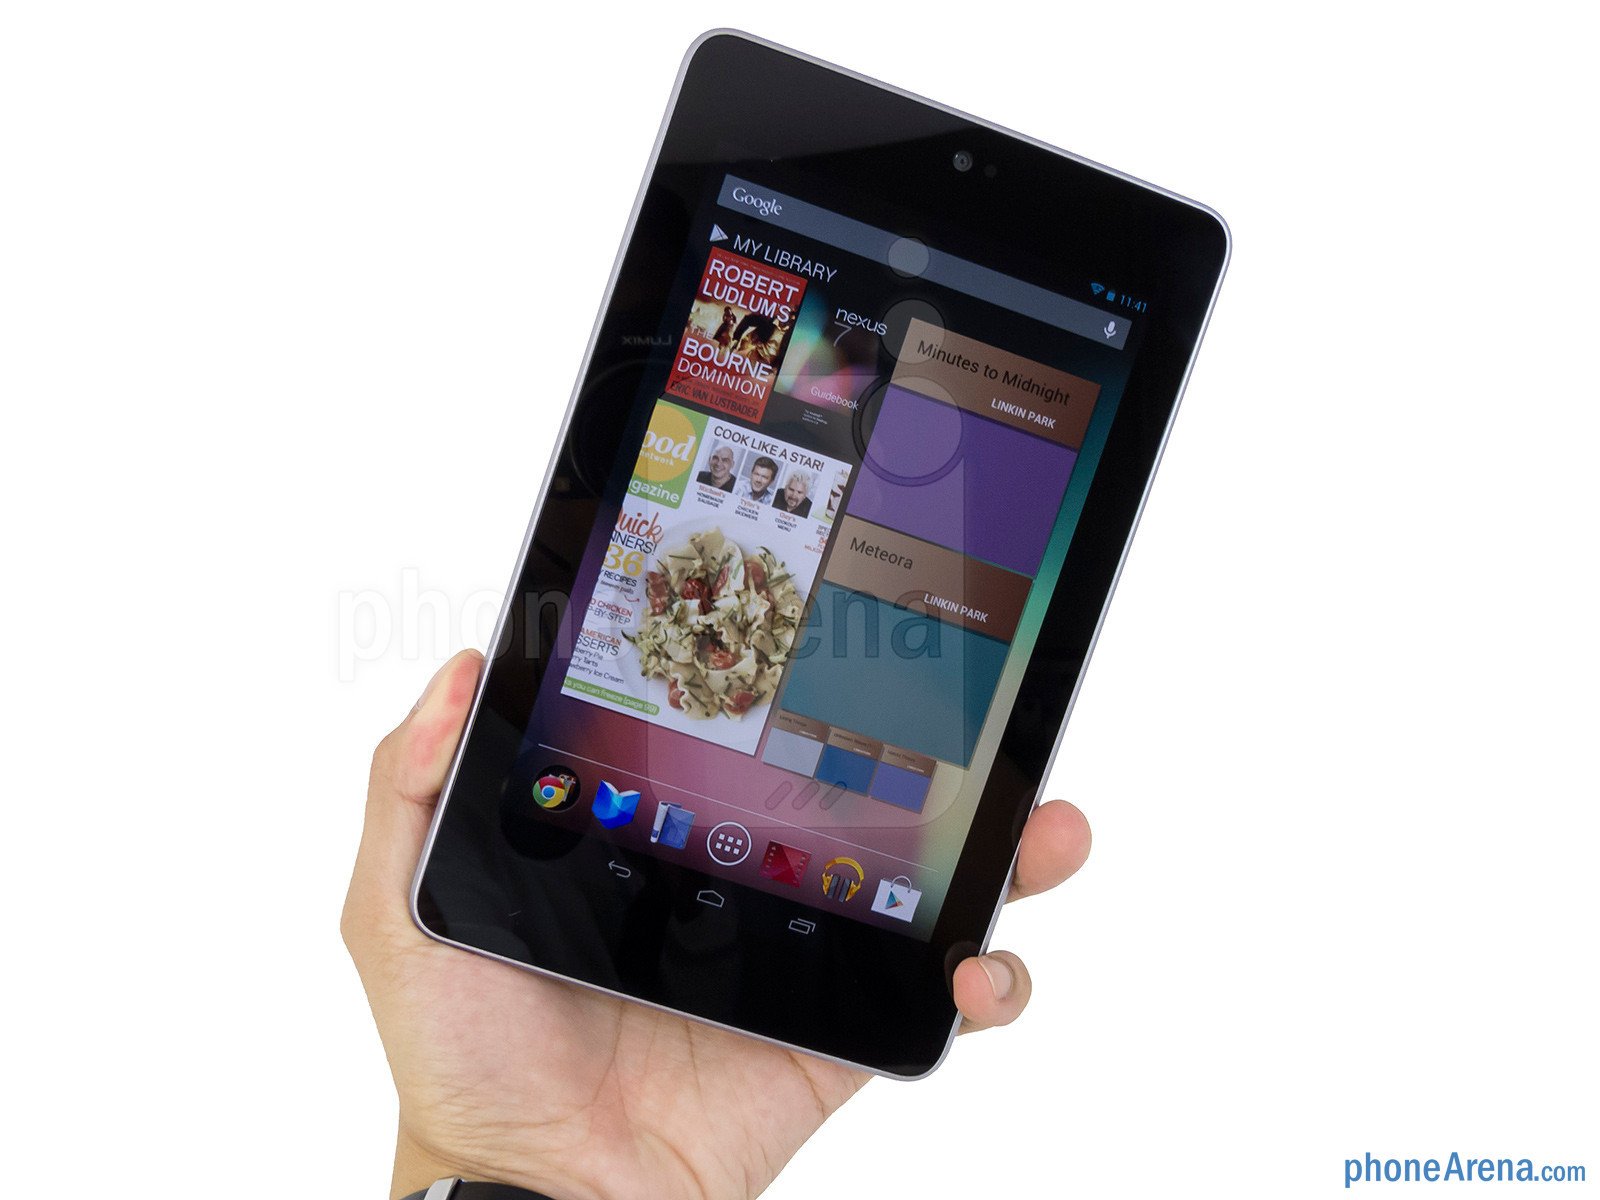 Google Nexus 7 Review Performance and Conclusion